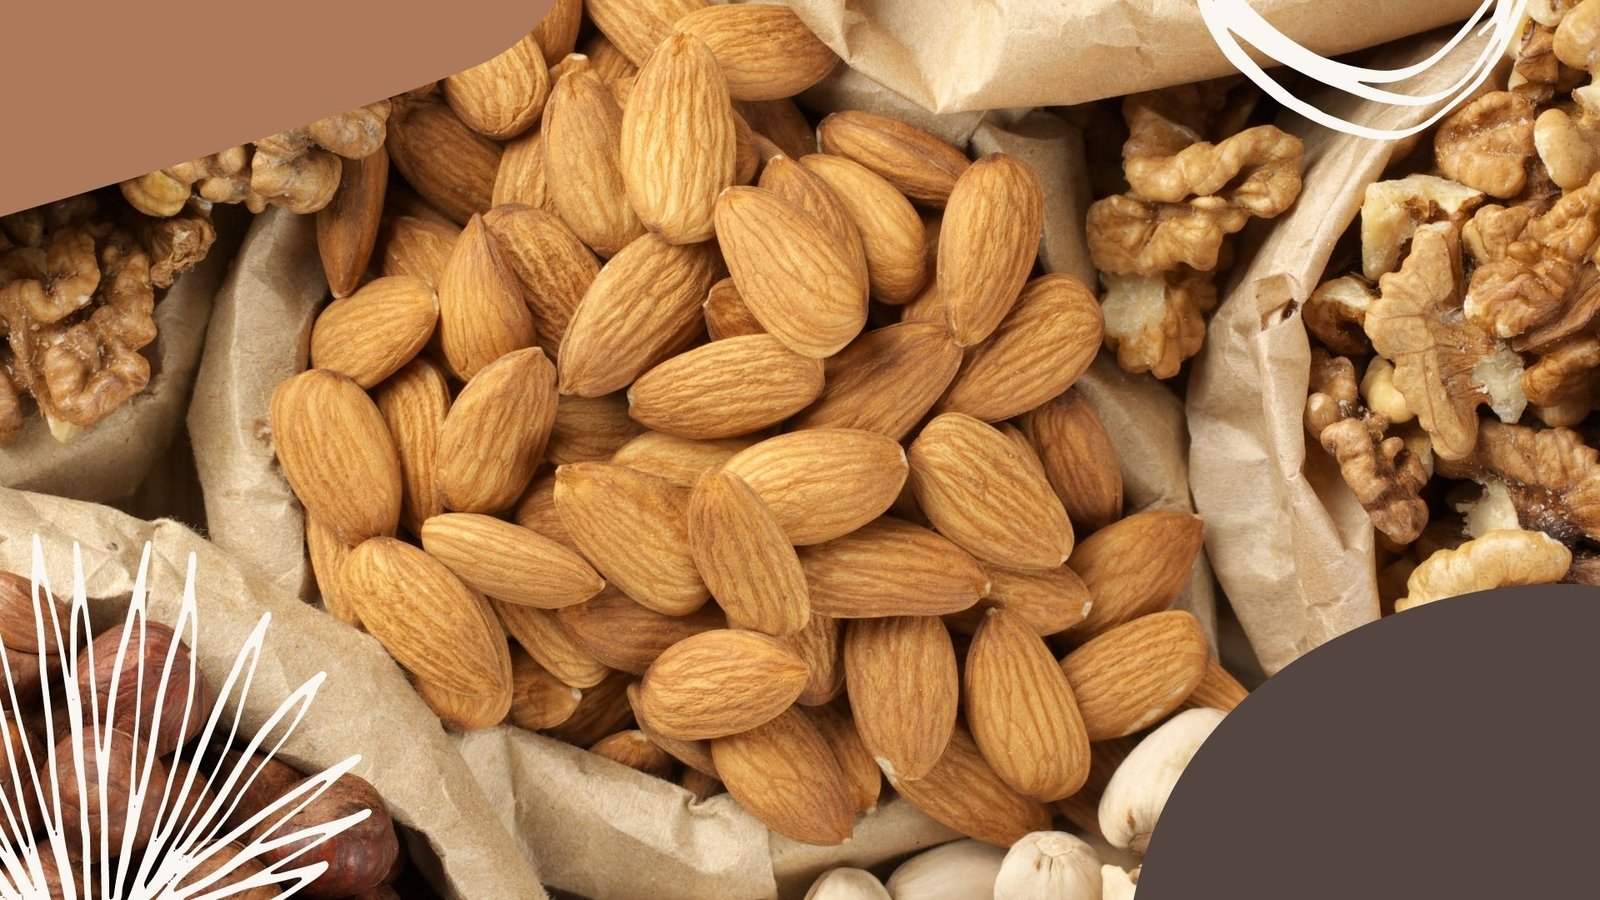 How to Store Nuts to Keep Them Fresh